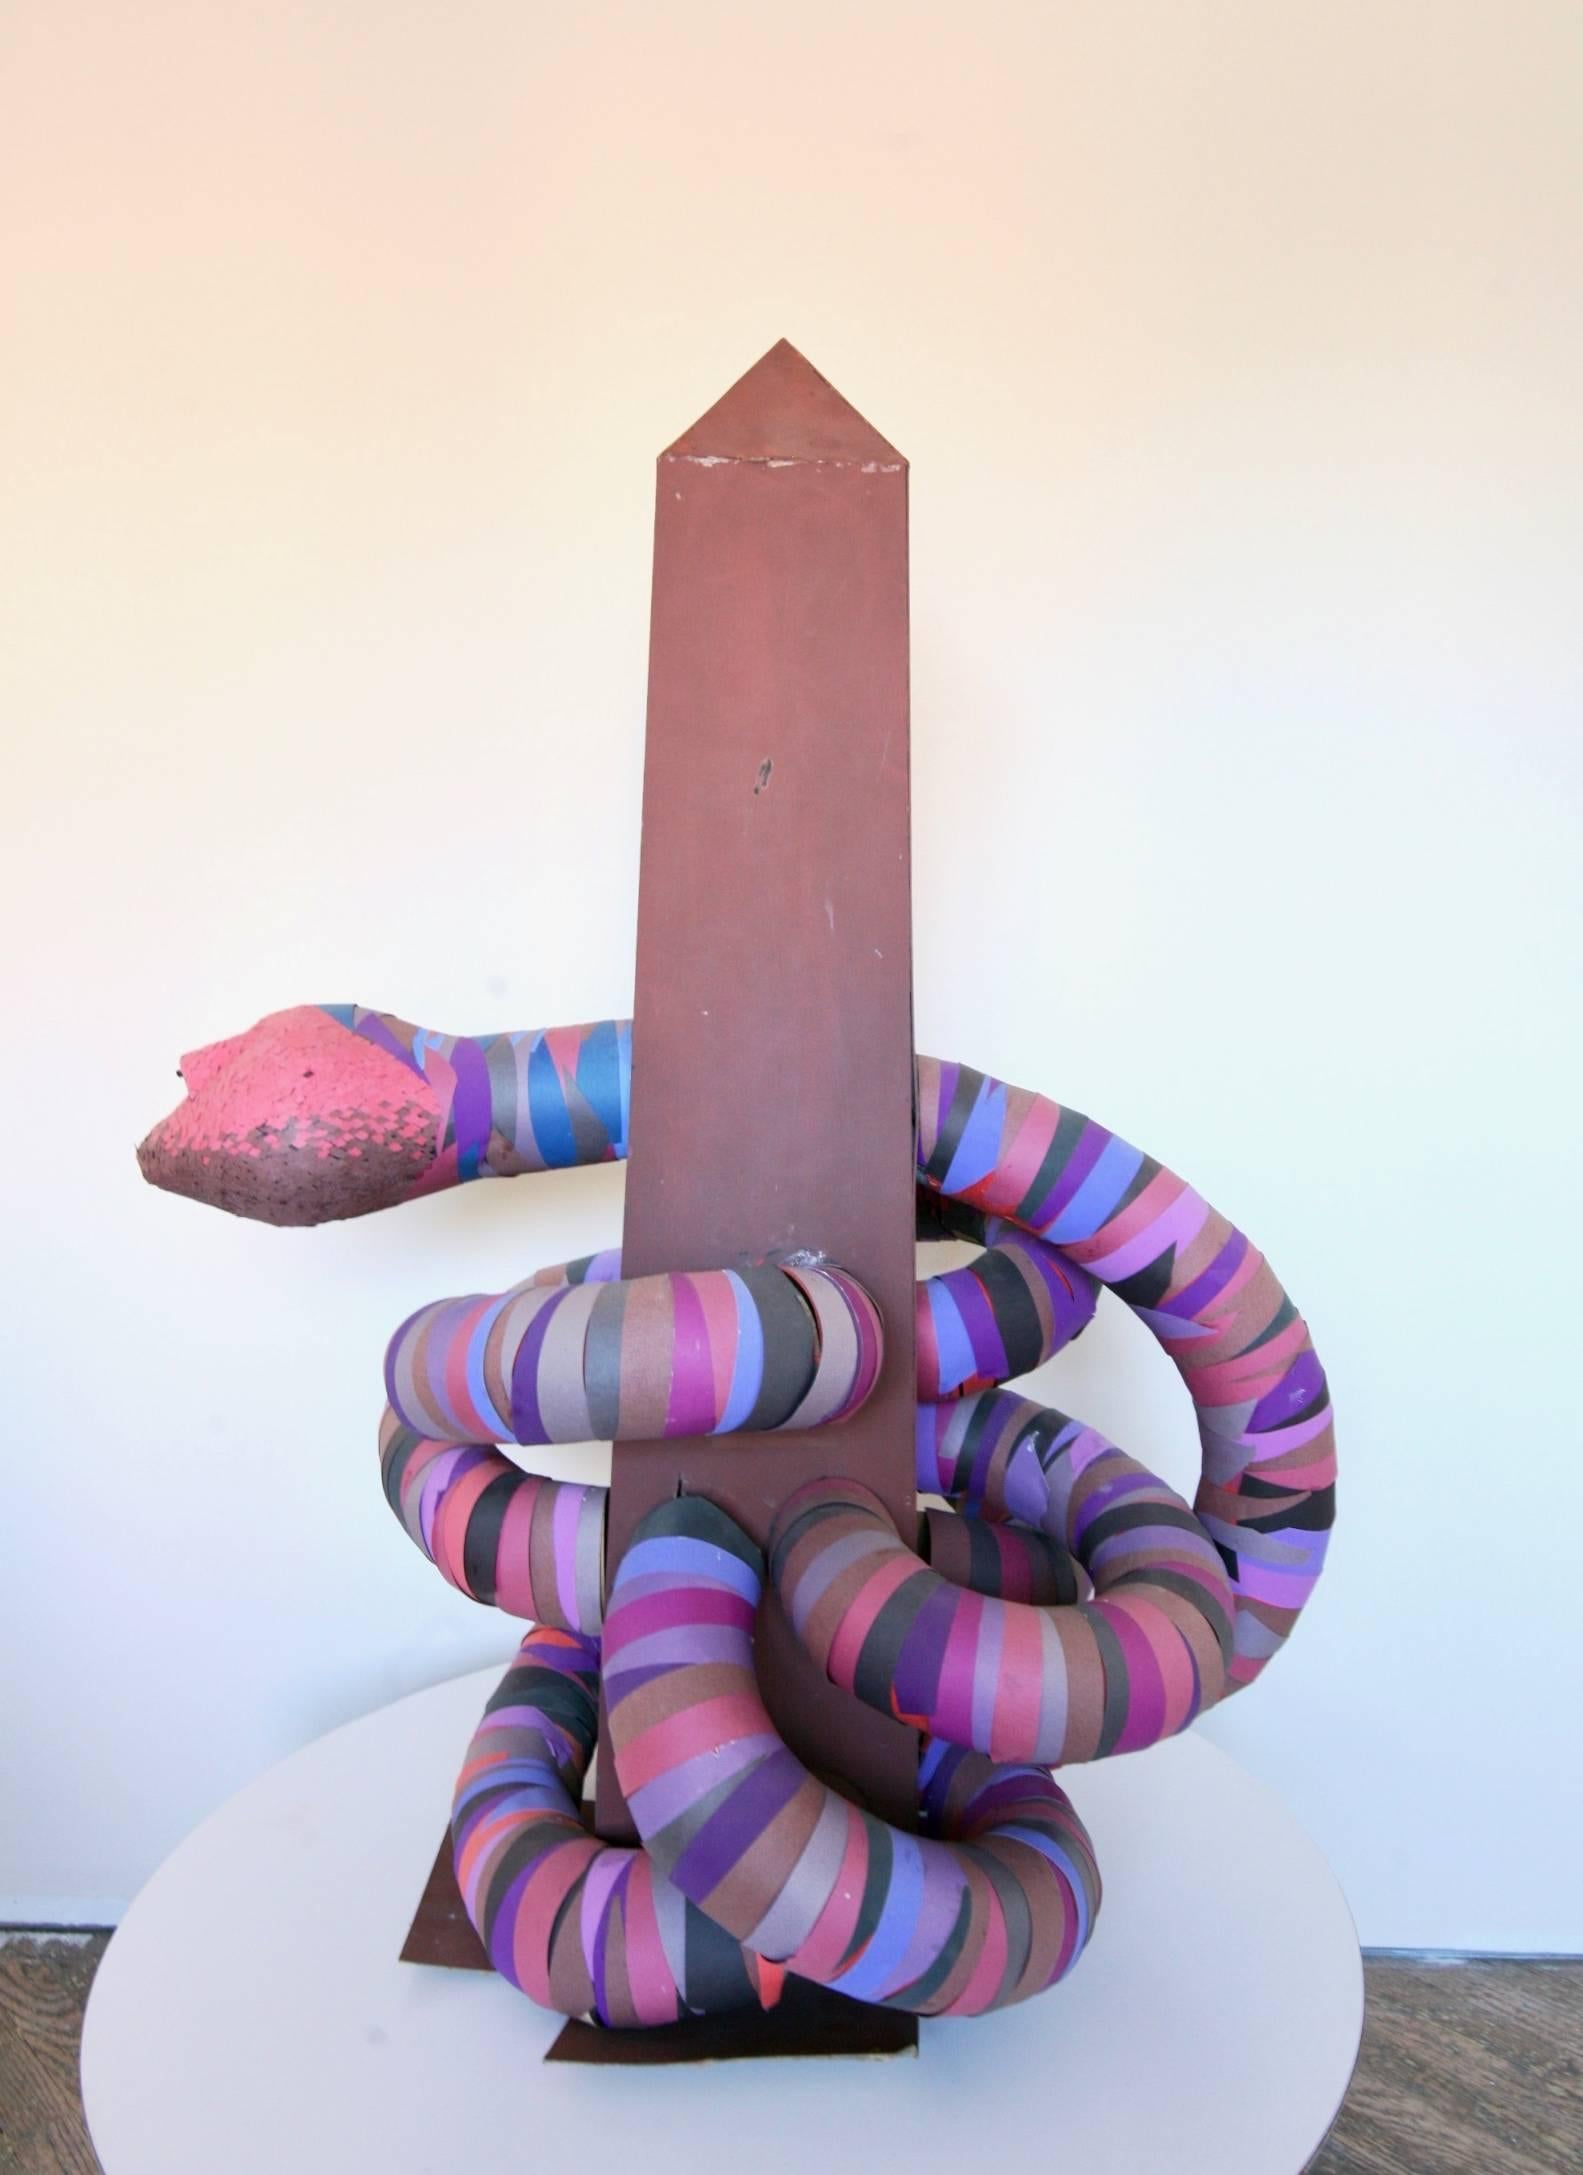 Irving Harper.
Untitled (Snake), circa 1970.
Painted paper construction.